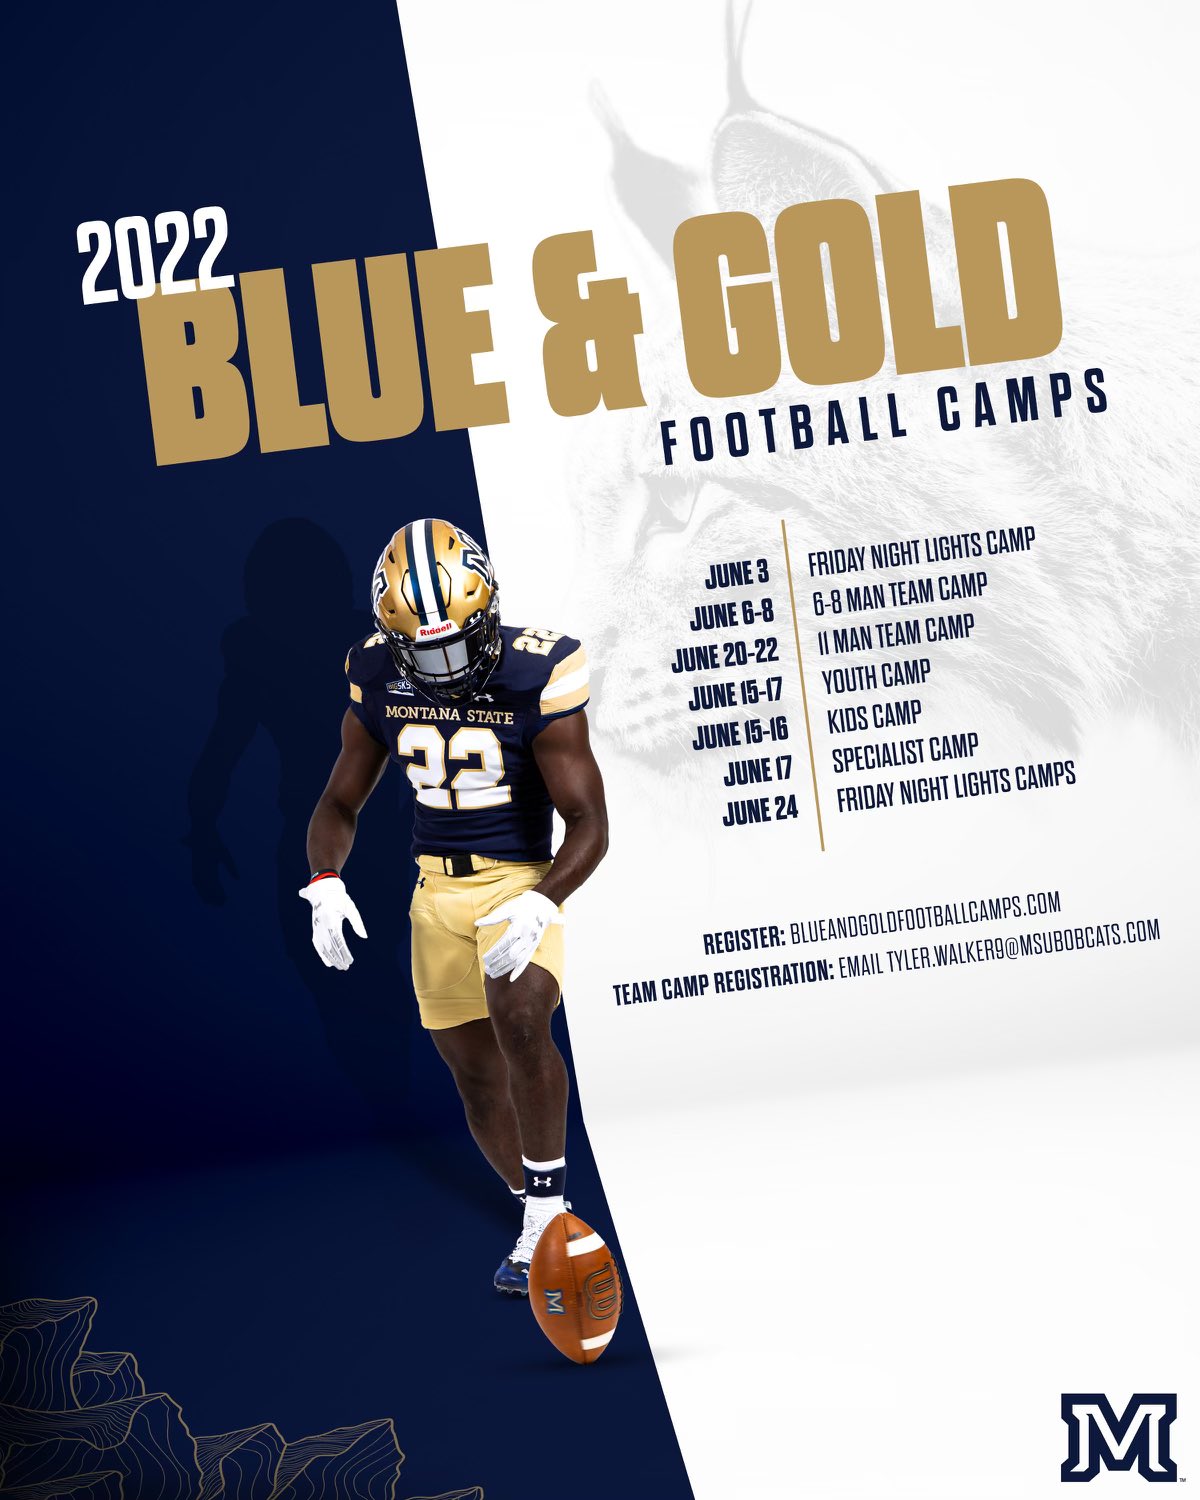 Montana State University Football Schedule 2022 -N3I87Whizkphm